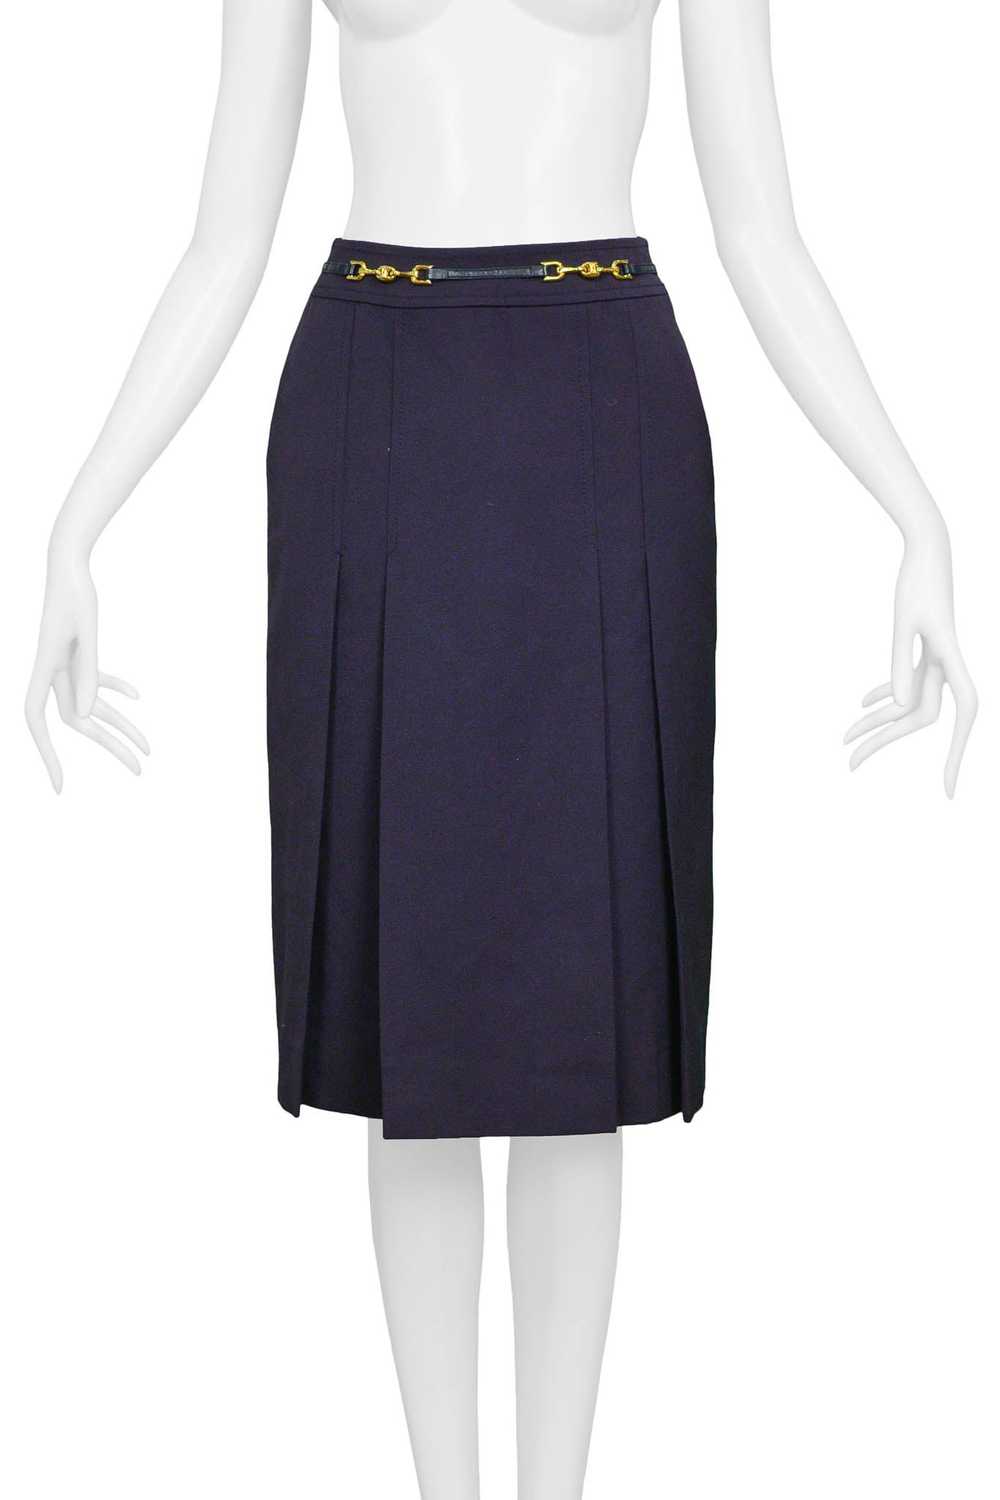 CELINE NAVY PURPLE WOOL SKIRT WITH GOLD LINK - image 3